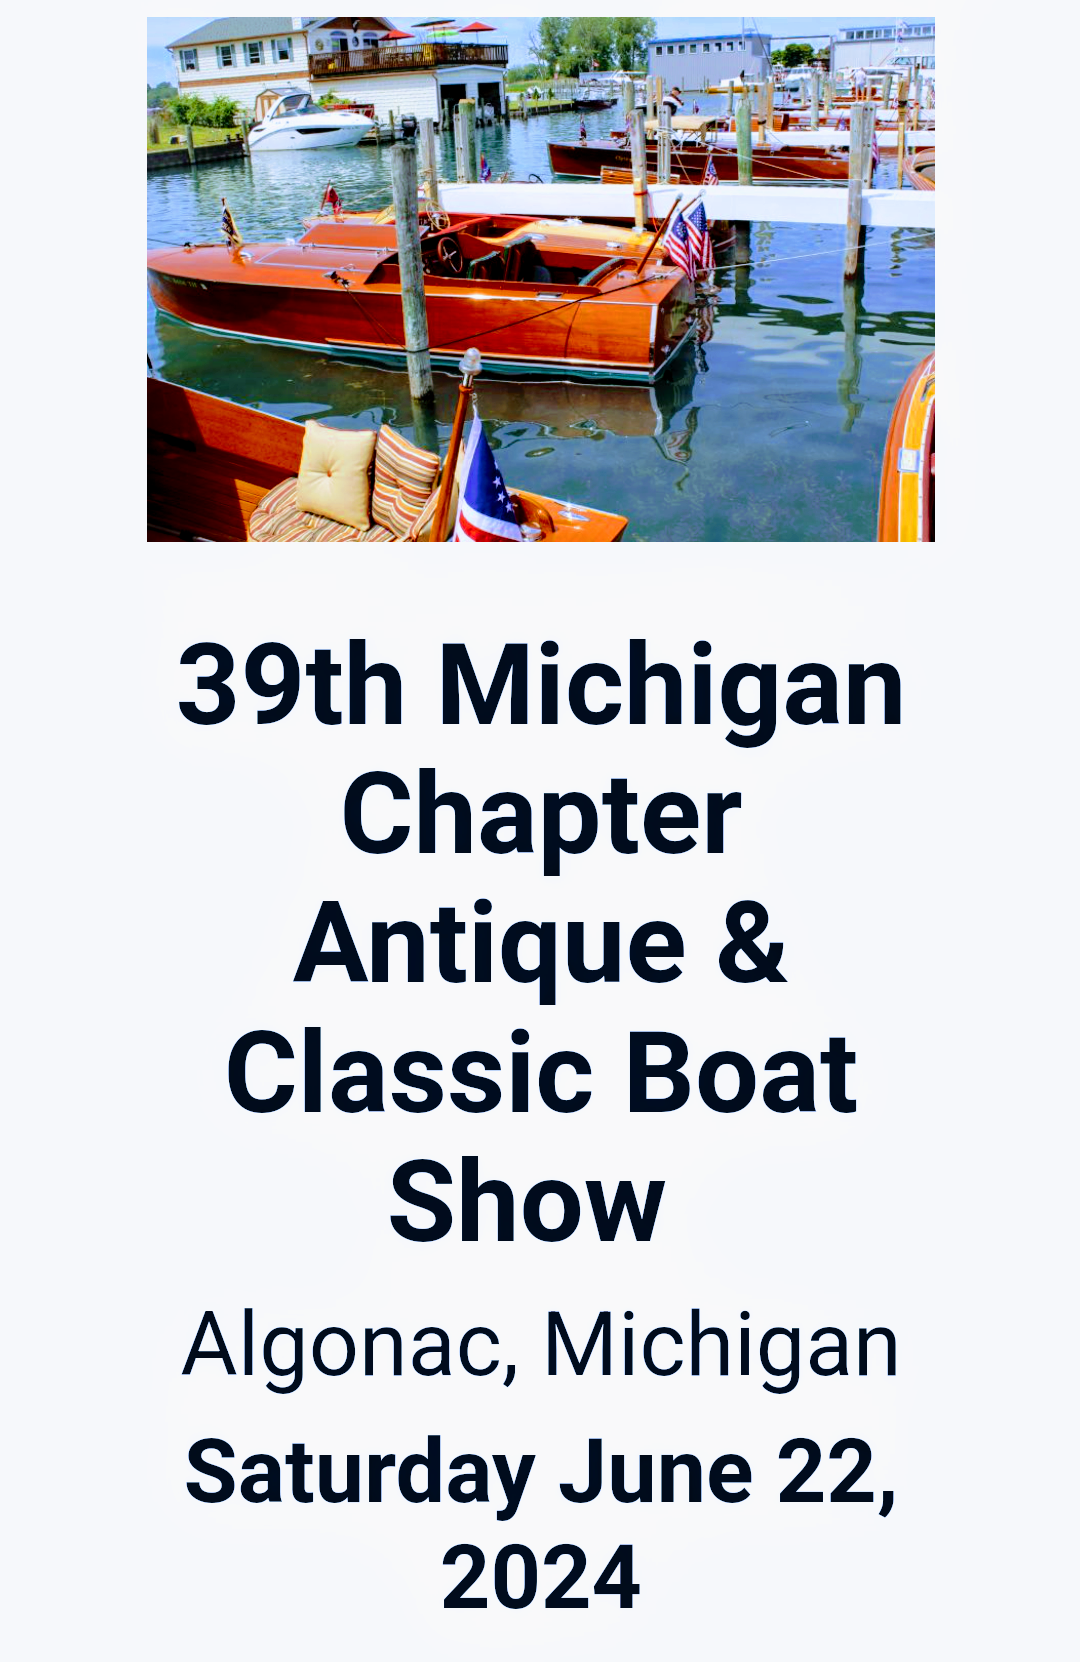 Members of the Michigan Musicorum will have the honor & privilege of singing the National Anthem once again at the Algonac Antique & Classic Boat Show on Saturday, June 22nd, 2024, 12:00noon Flagraising at the Algonac Harbour Club in Algonac, MI!  For more info, please click on the image above from the website: https://acbs.org/events/39th-annual-algonac-antique-classic-boat-show-where-it-all-began/. Thank you!